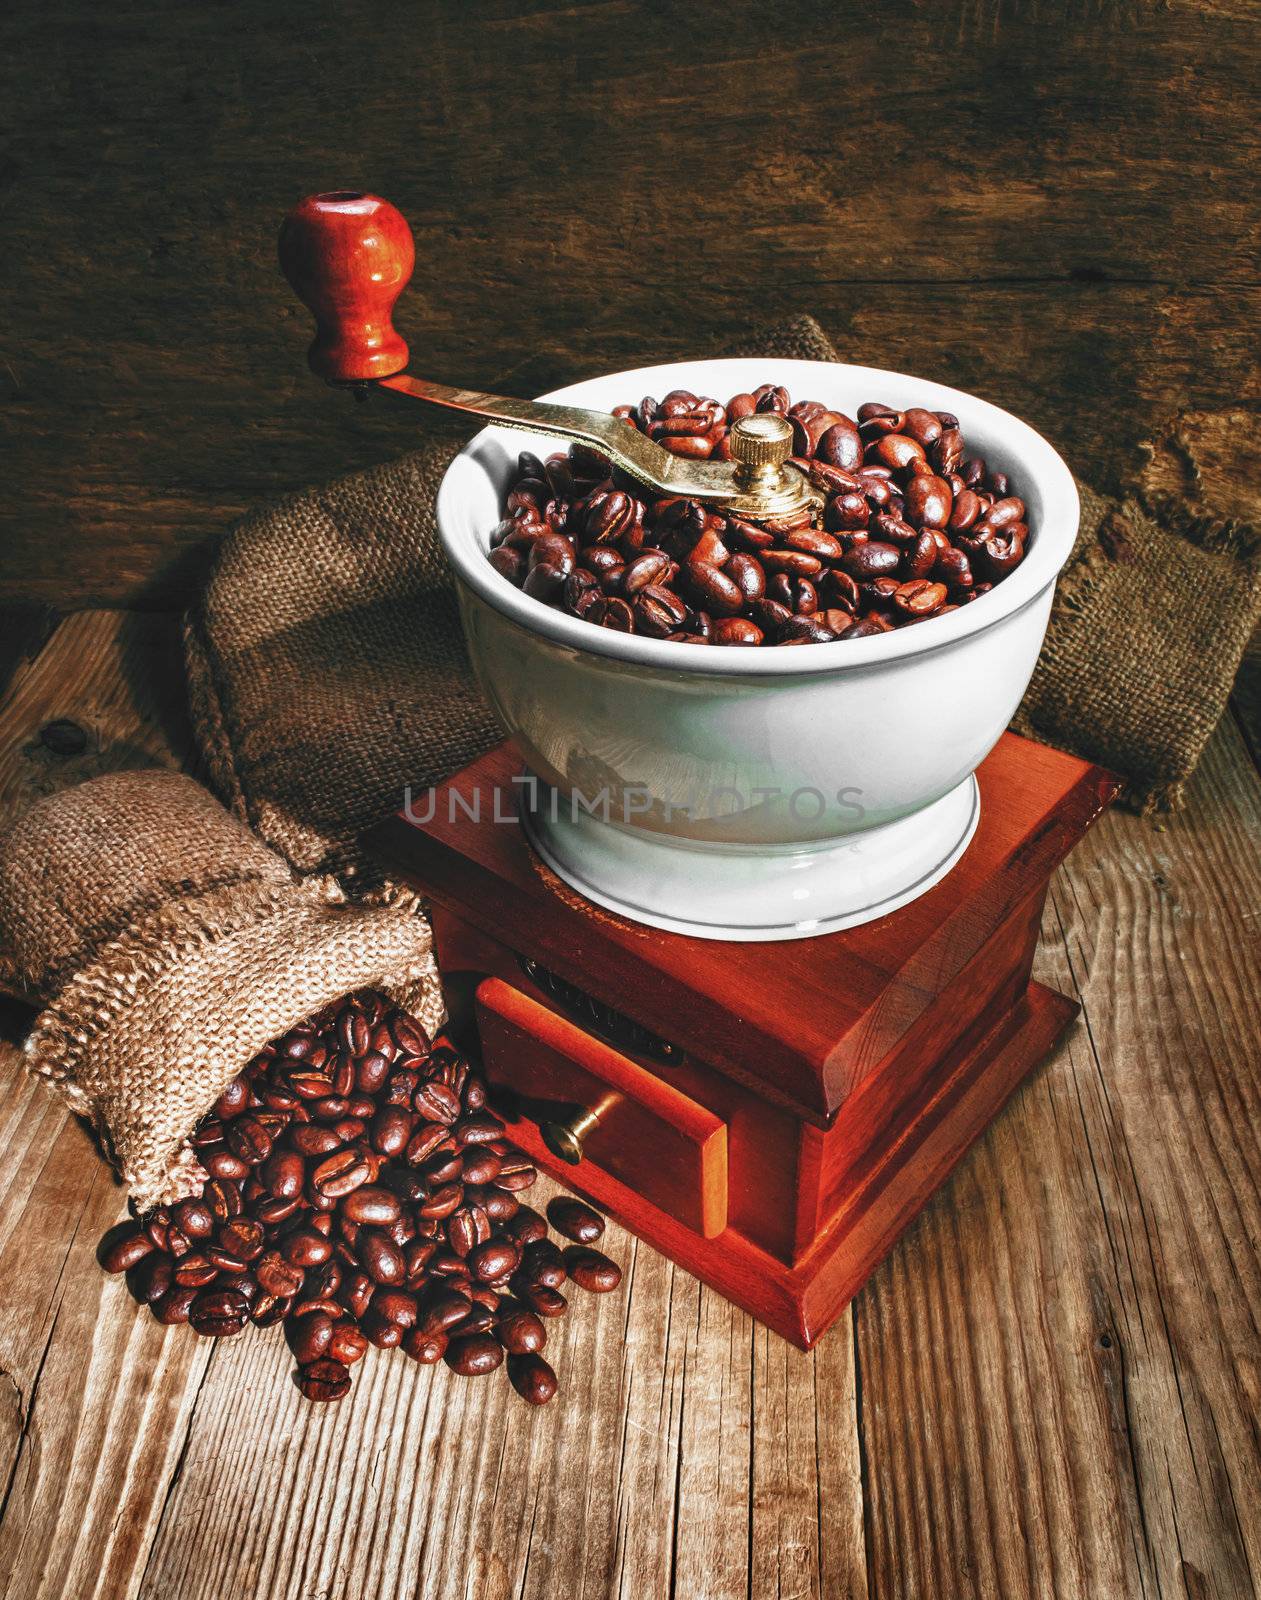 grinder and other accessories for the coffee in an old-style